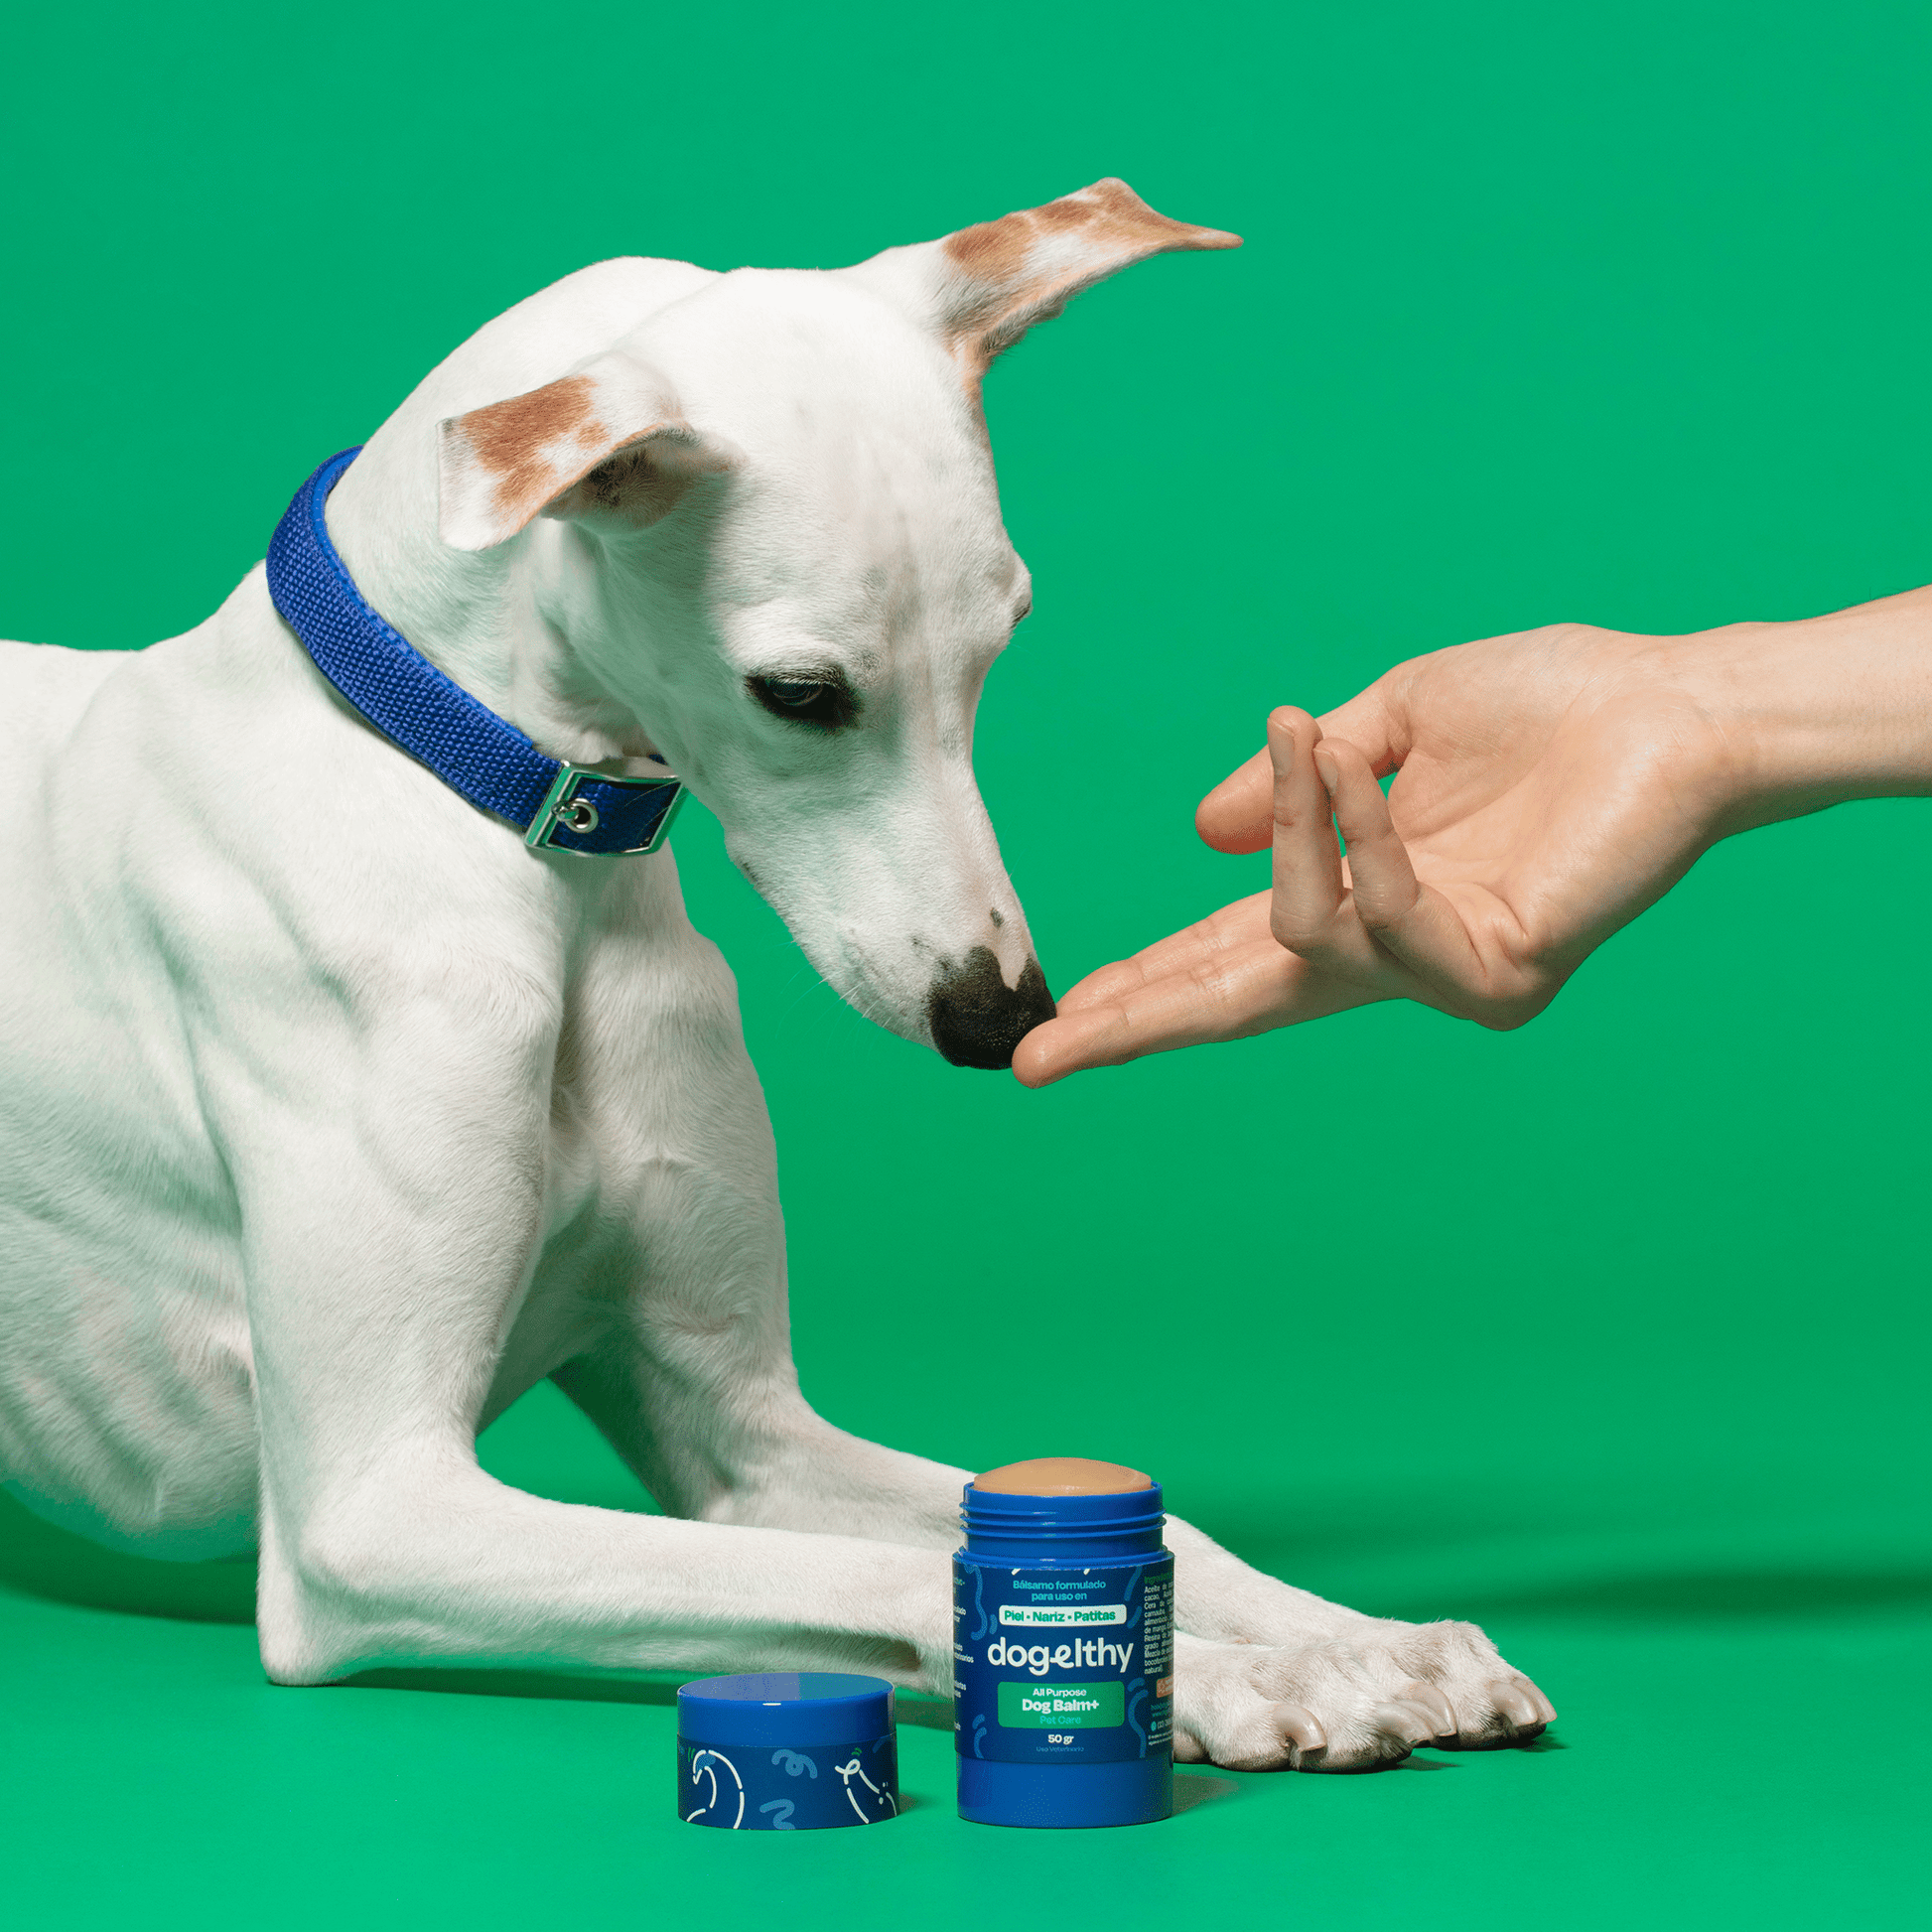 Ultimate Wellness Kit - Dogelthy